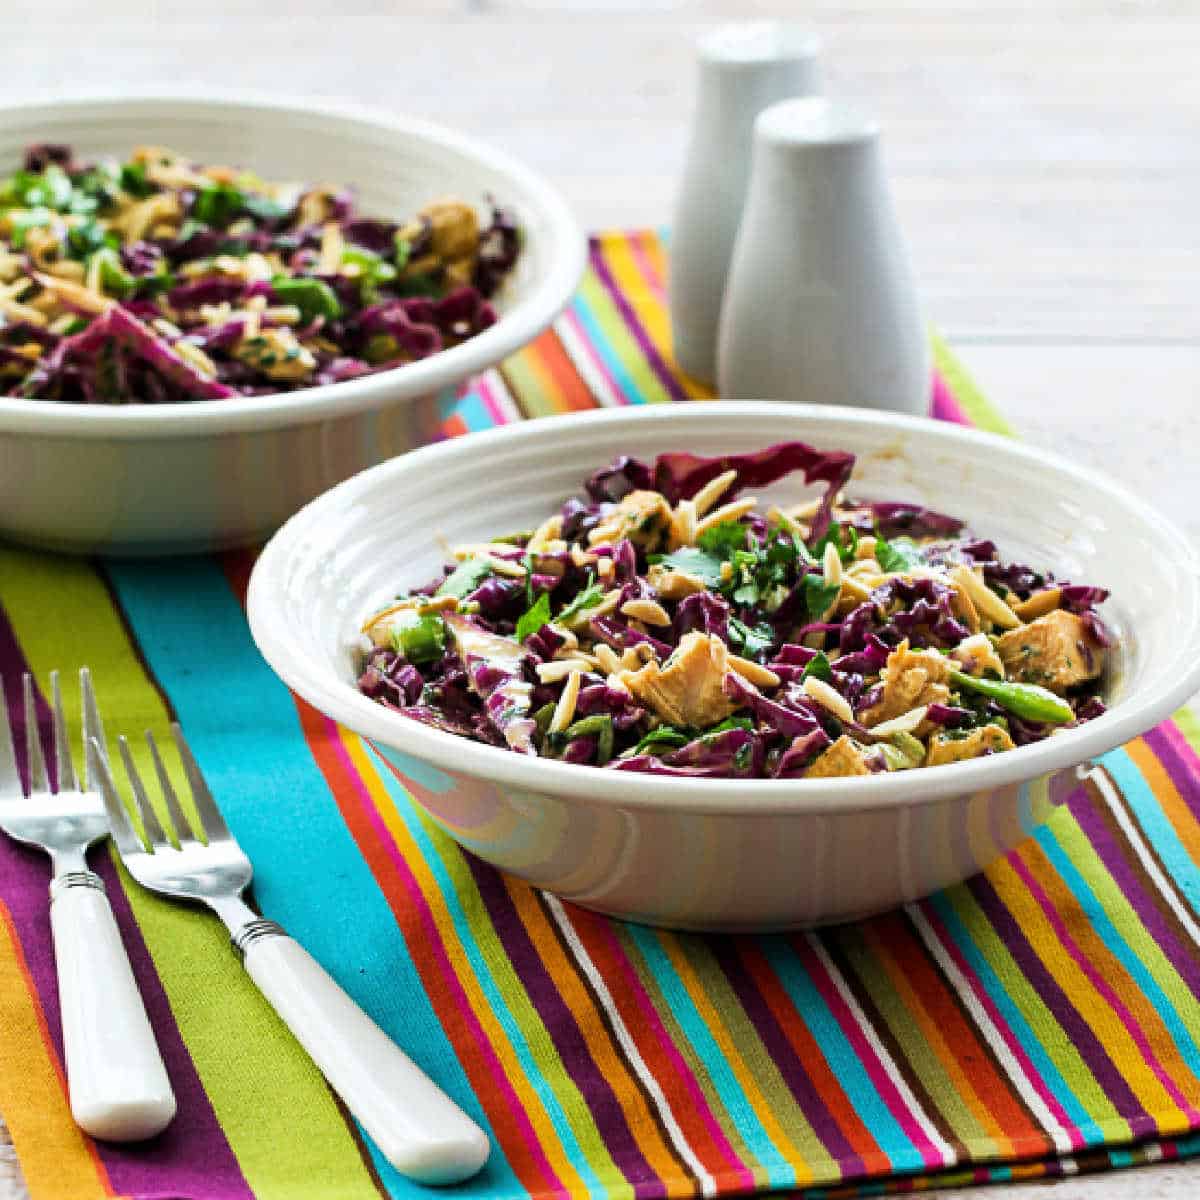 Square image for Asian Red Cabbage Salad with Chicken shown in two bowls.